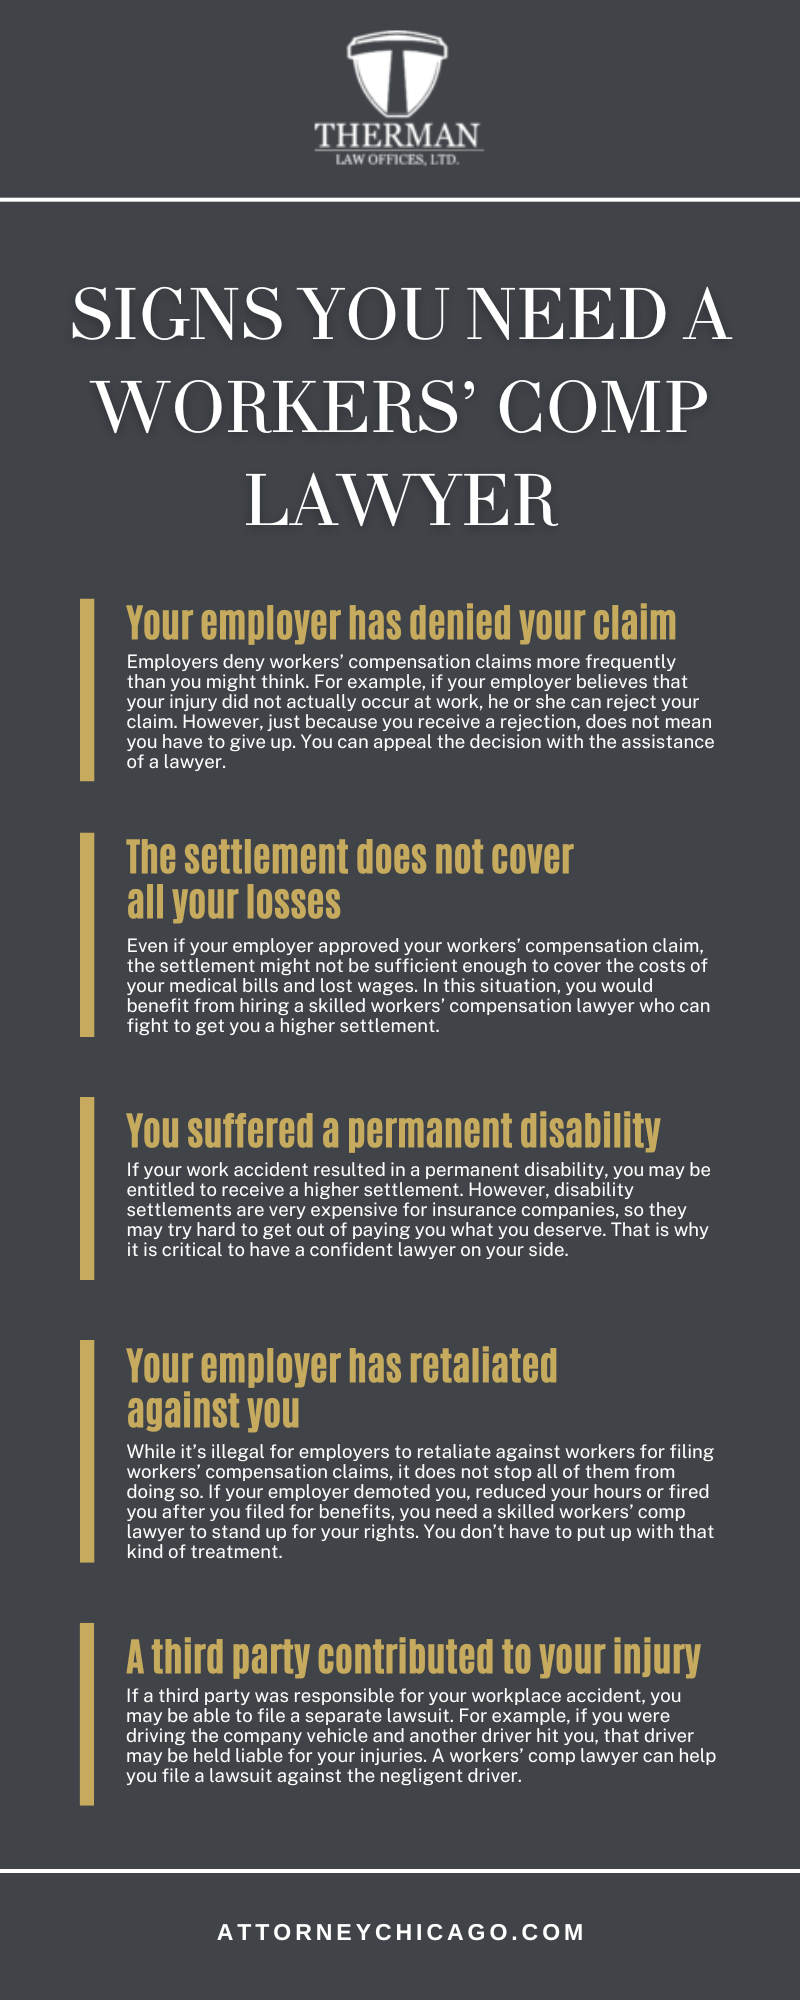 Signs You Need A Workers' Comp Lawyer Infographic